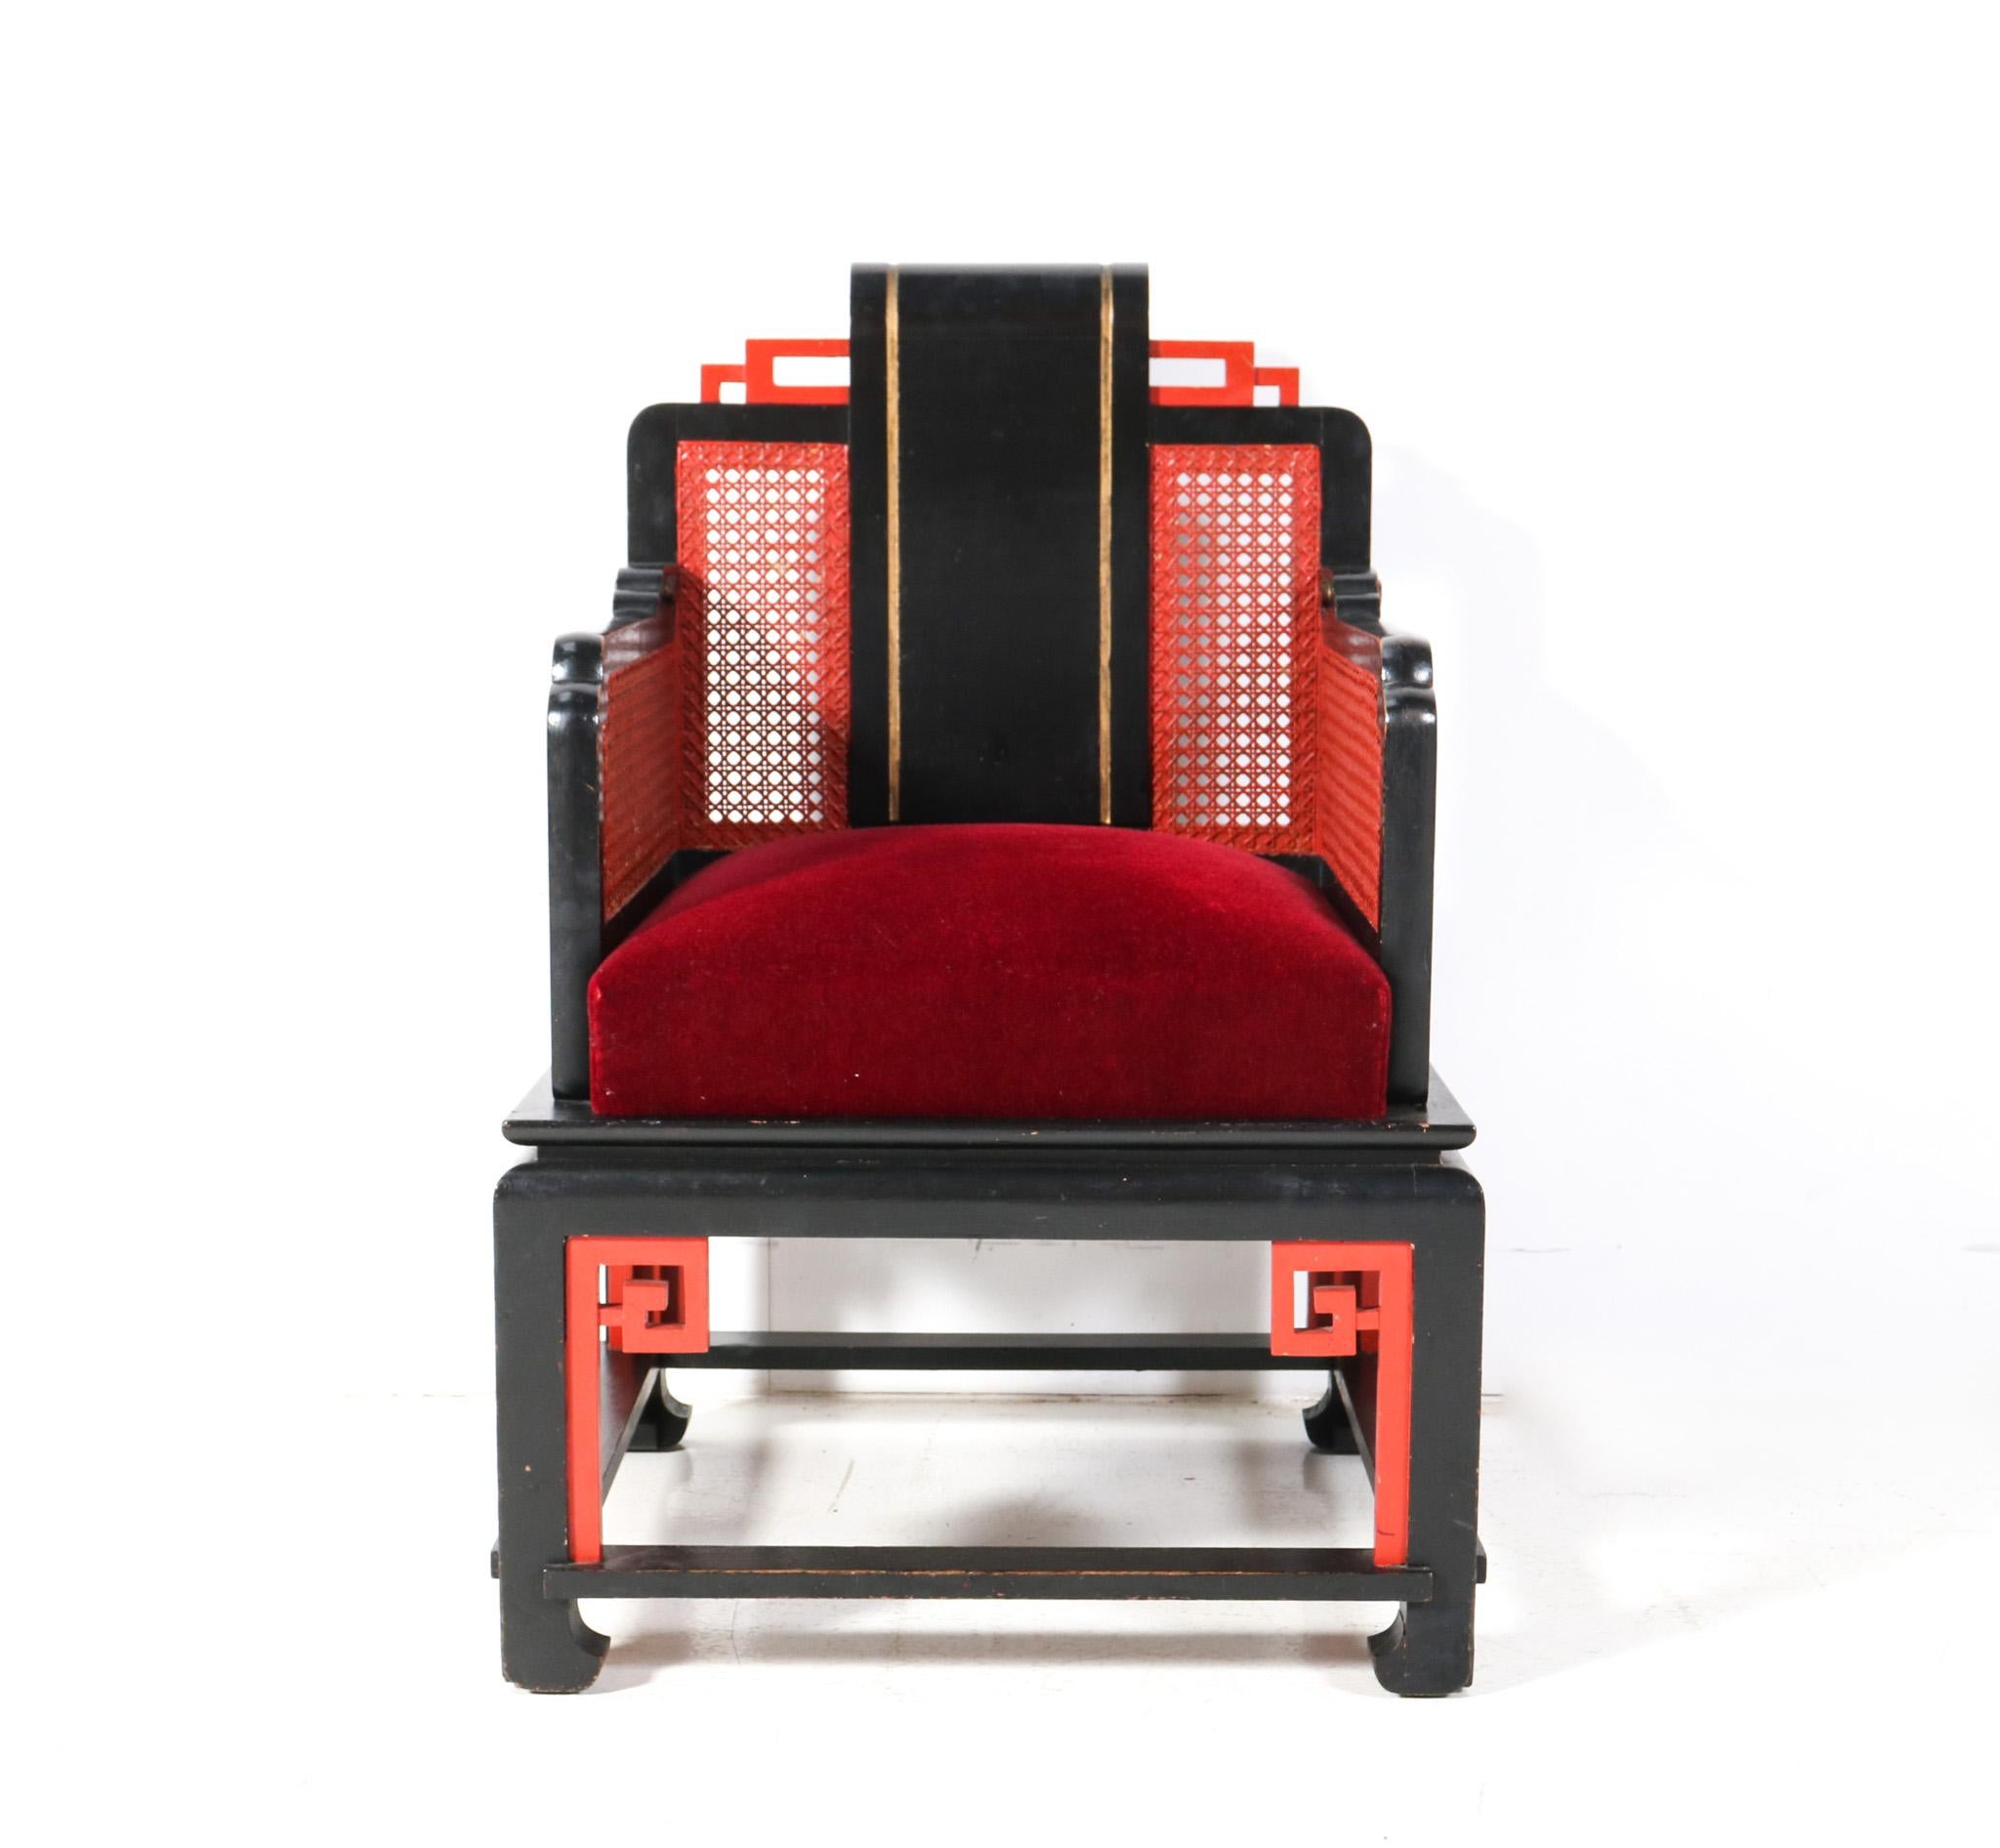 Stunning and rare Art Deco Japonisme armchair.
Striking French design from the 1930s.
Original lacquered beech frame with original hand-painted wicker back and armrests.
Seat has been re-upholstered in red velvet  by the former owner.
This wonderful